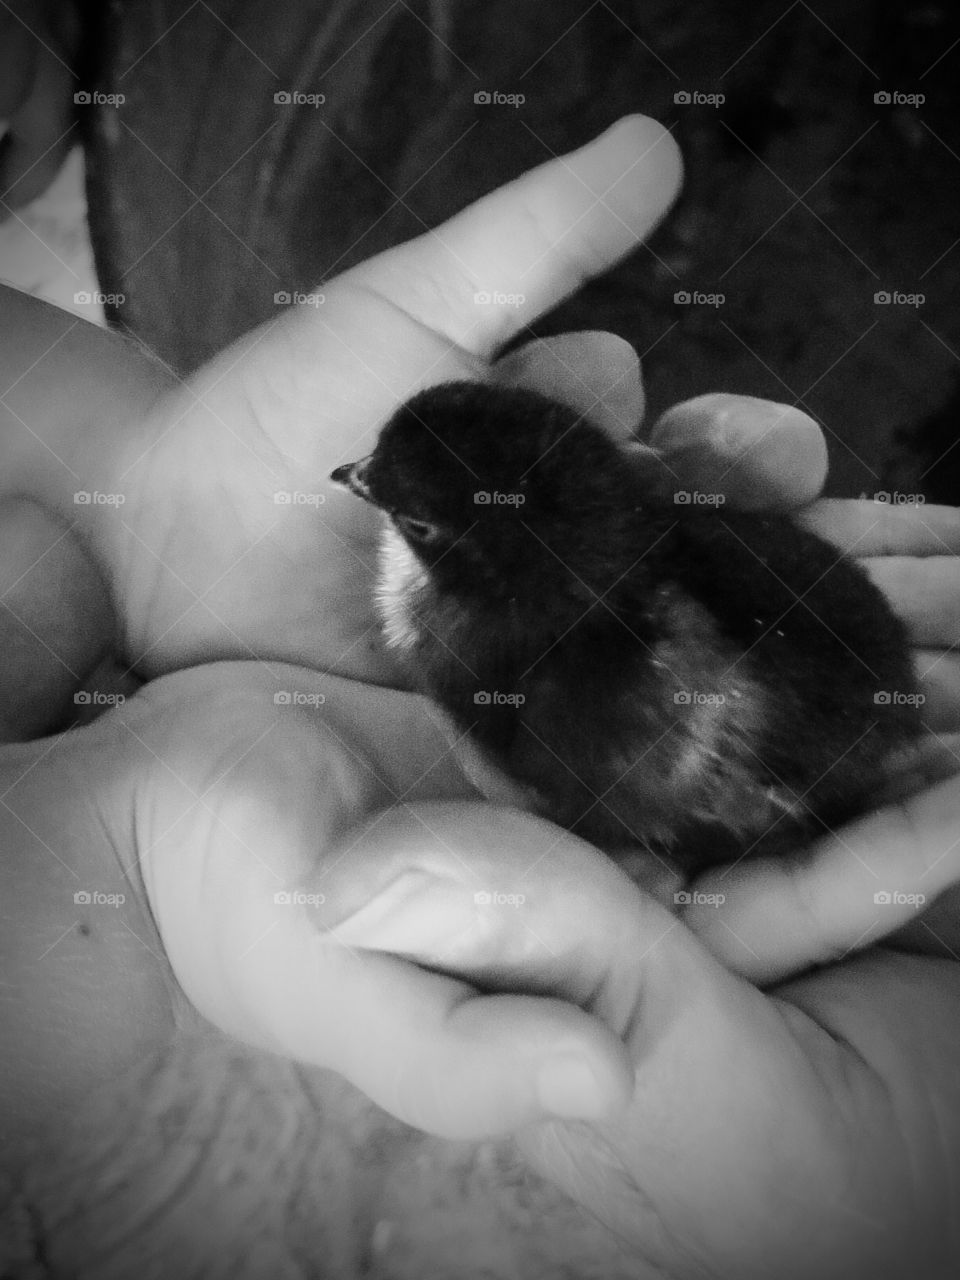 Just Hatched. A baby chick newly hatched, gently being held in a little girl's hand